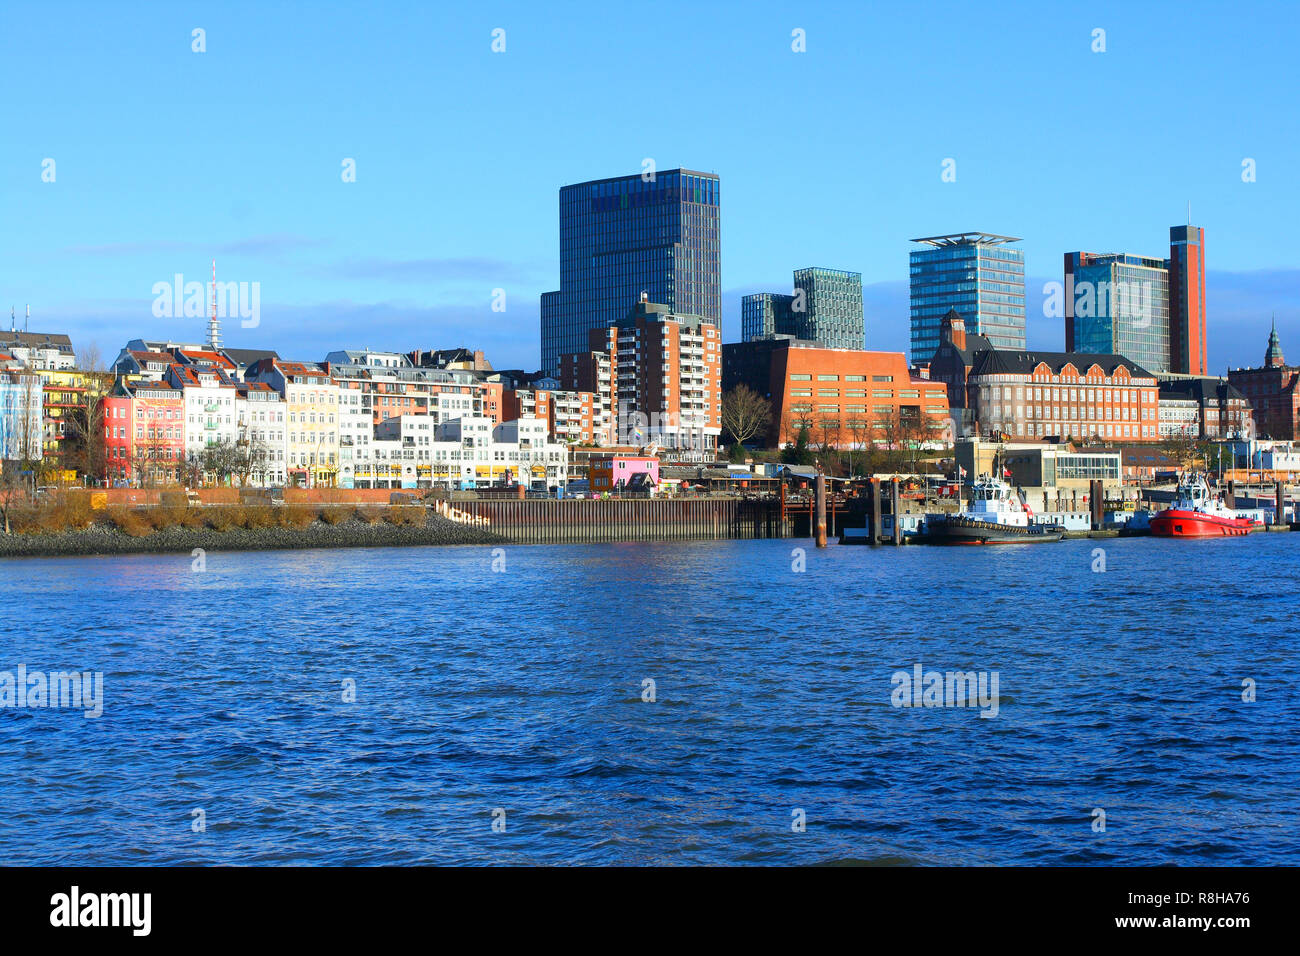 General view of Hamburg from Harbour Stock Photo